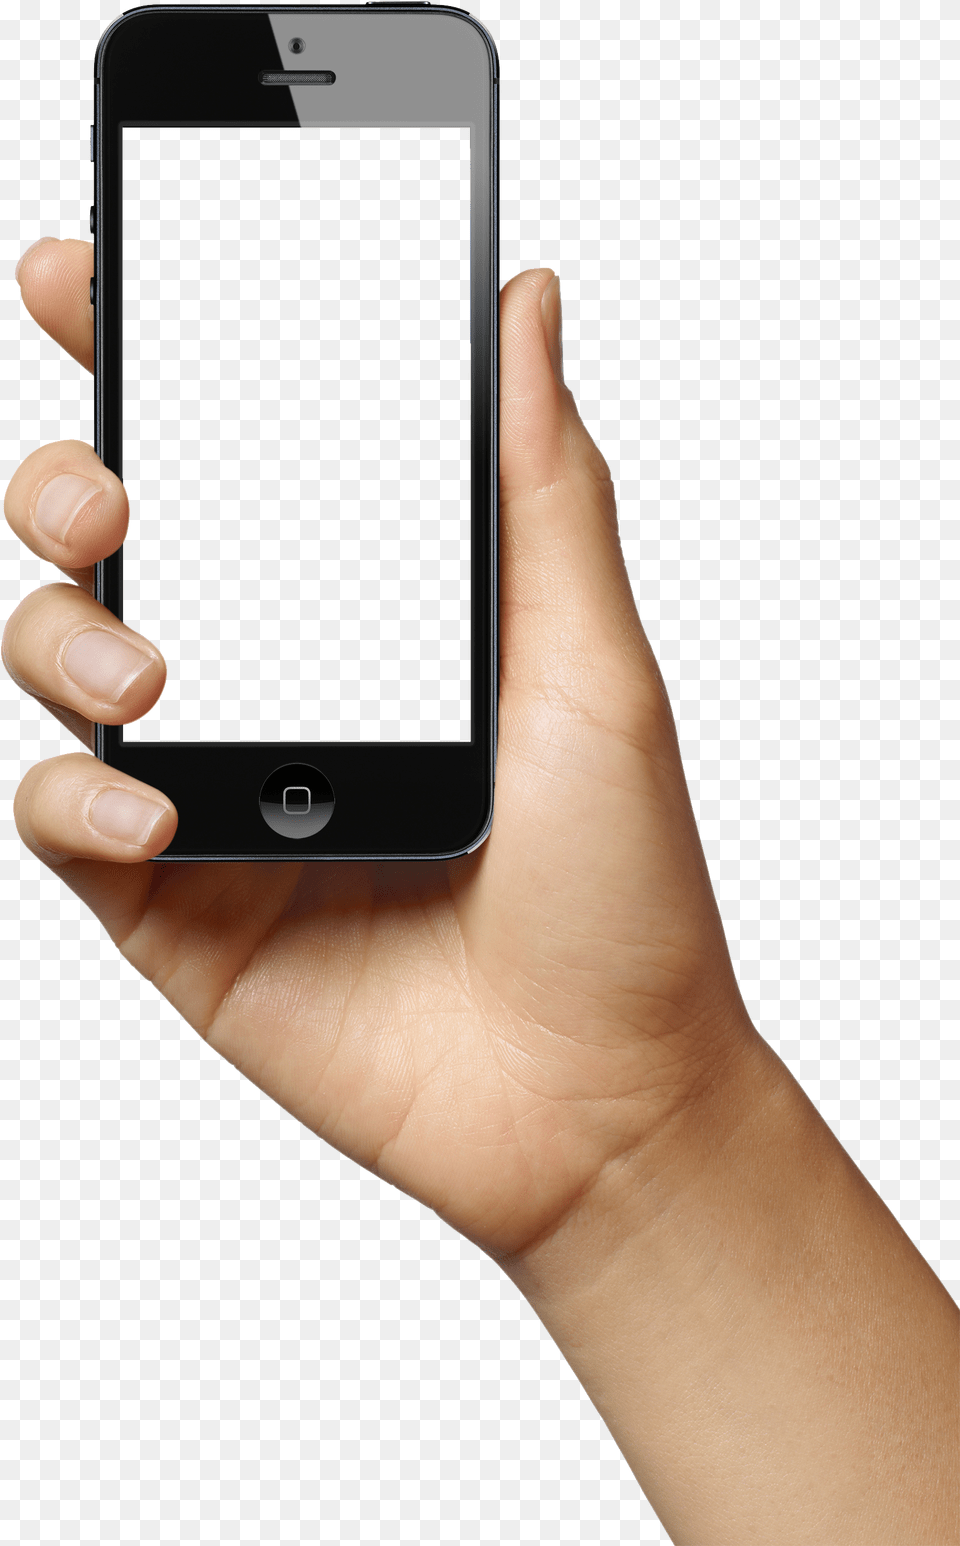 Phone In Hand Image, Electronics, Mobile Phone, Iphone Free Png